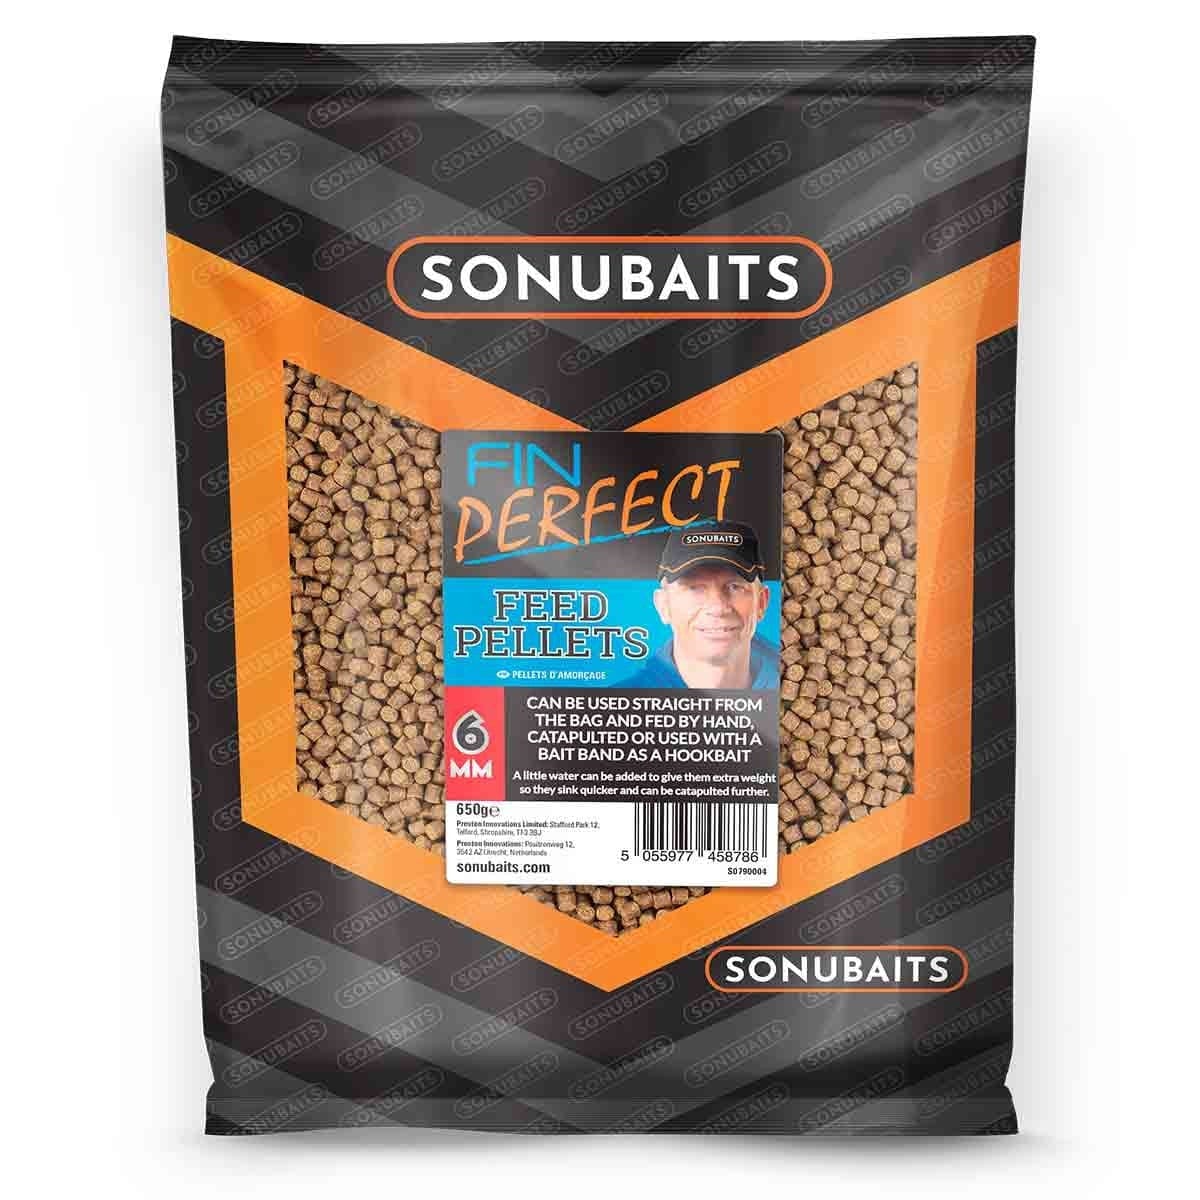 Sonubaits Fin Perfect Feed Pellets 6mm.